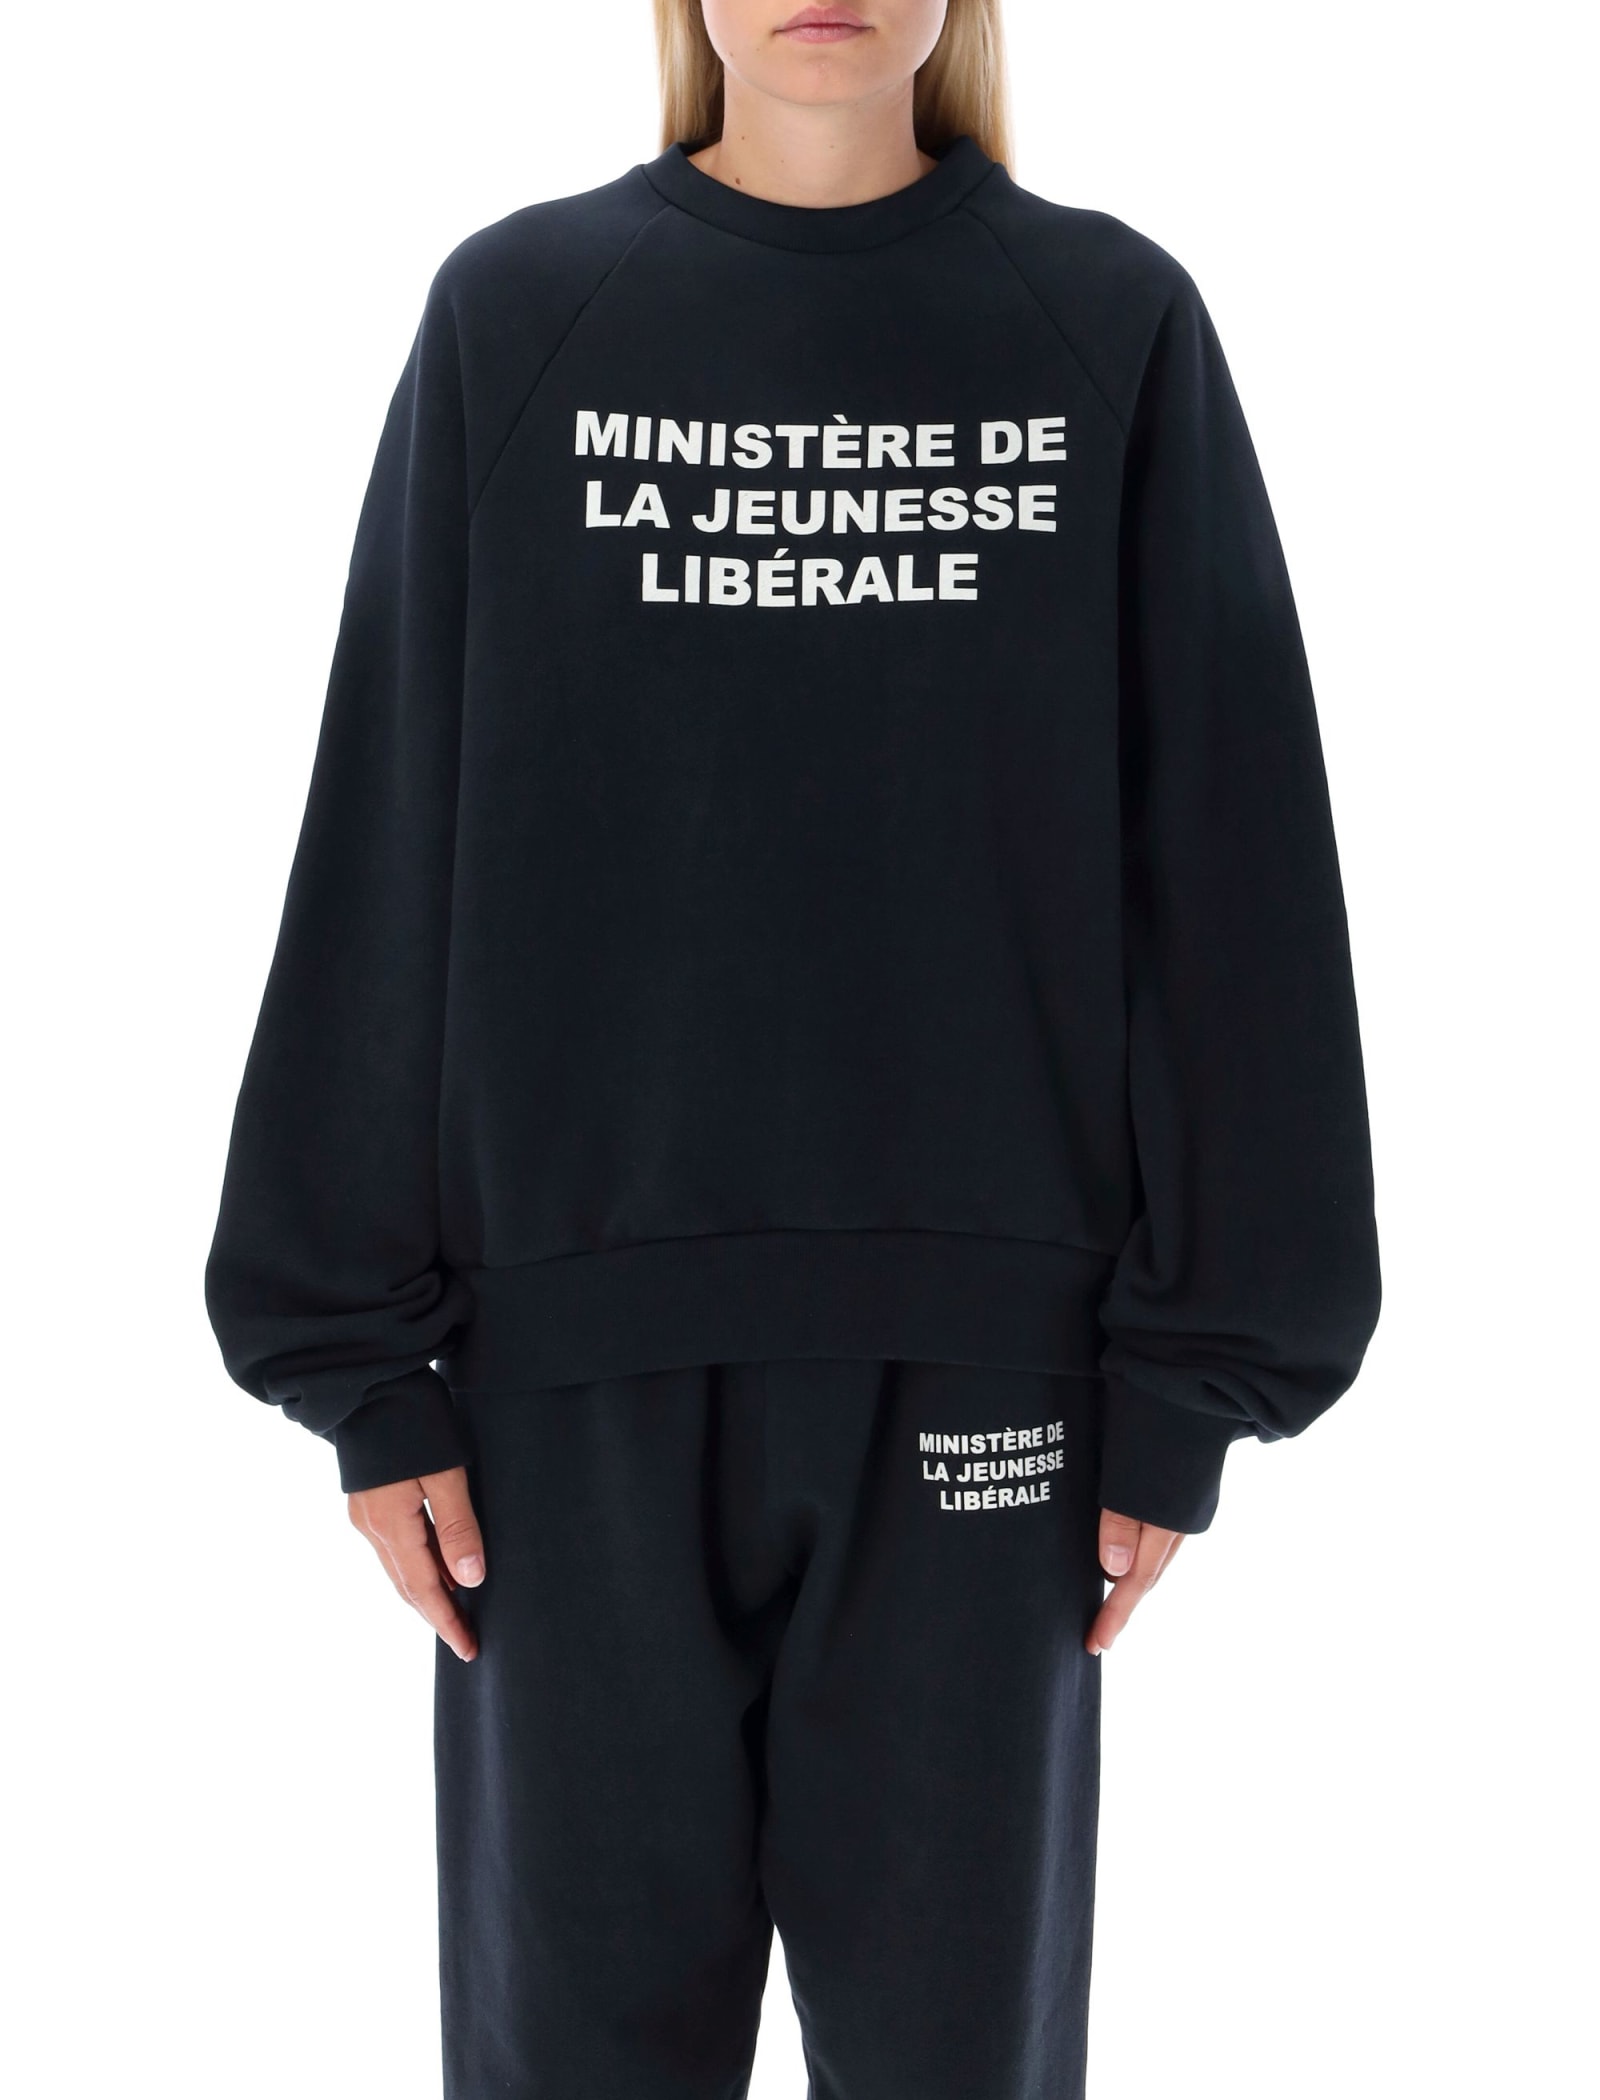 Liberal Youth Ministry Printed Crewneck In Black